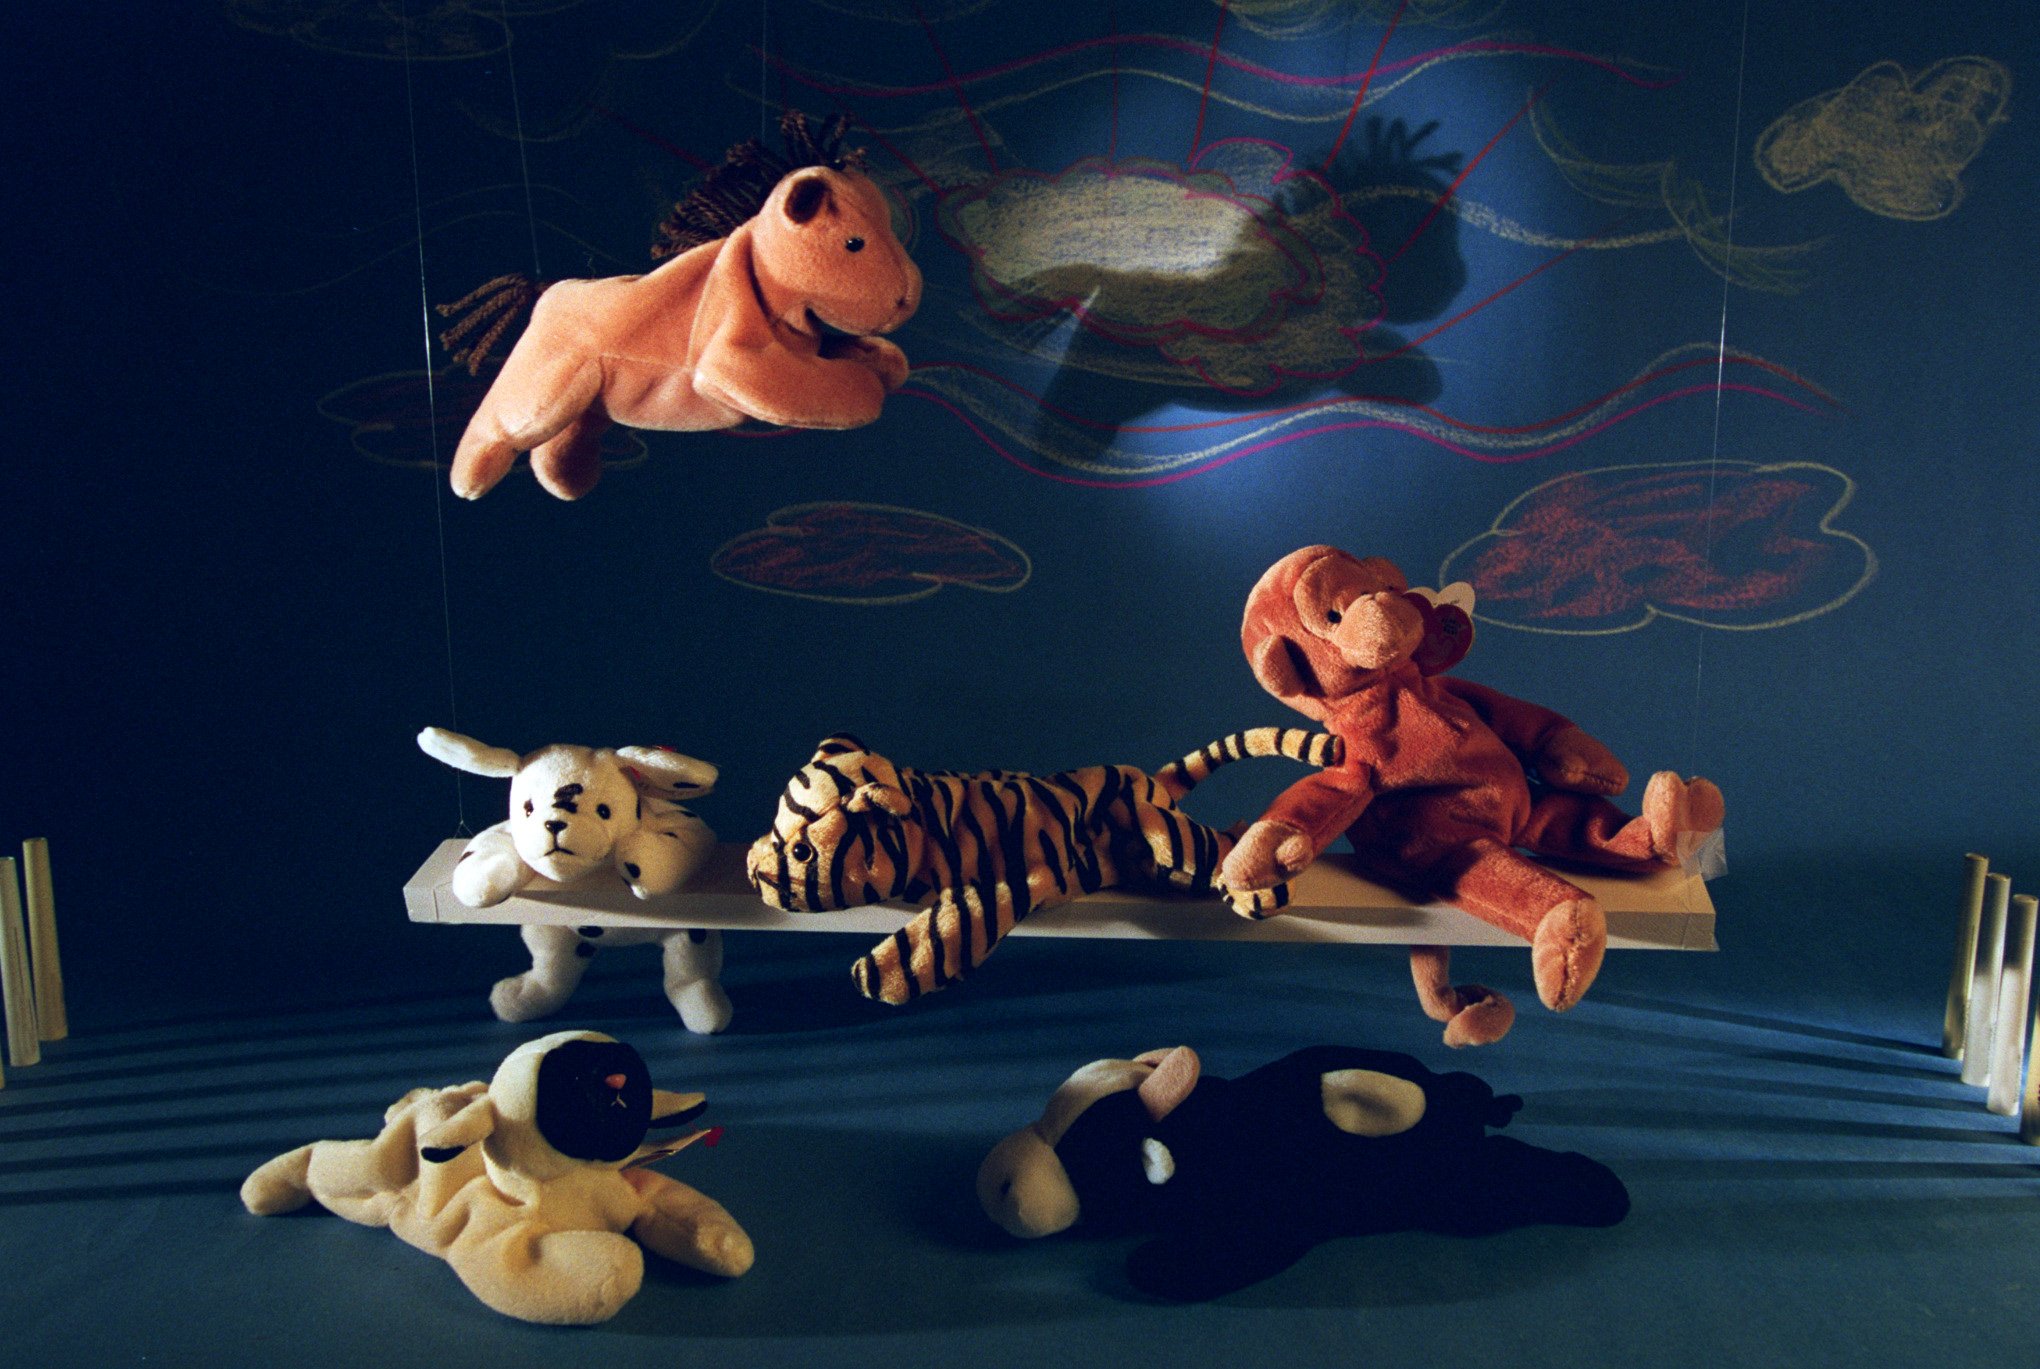 Beanie Babies collection